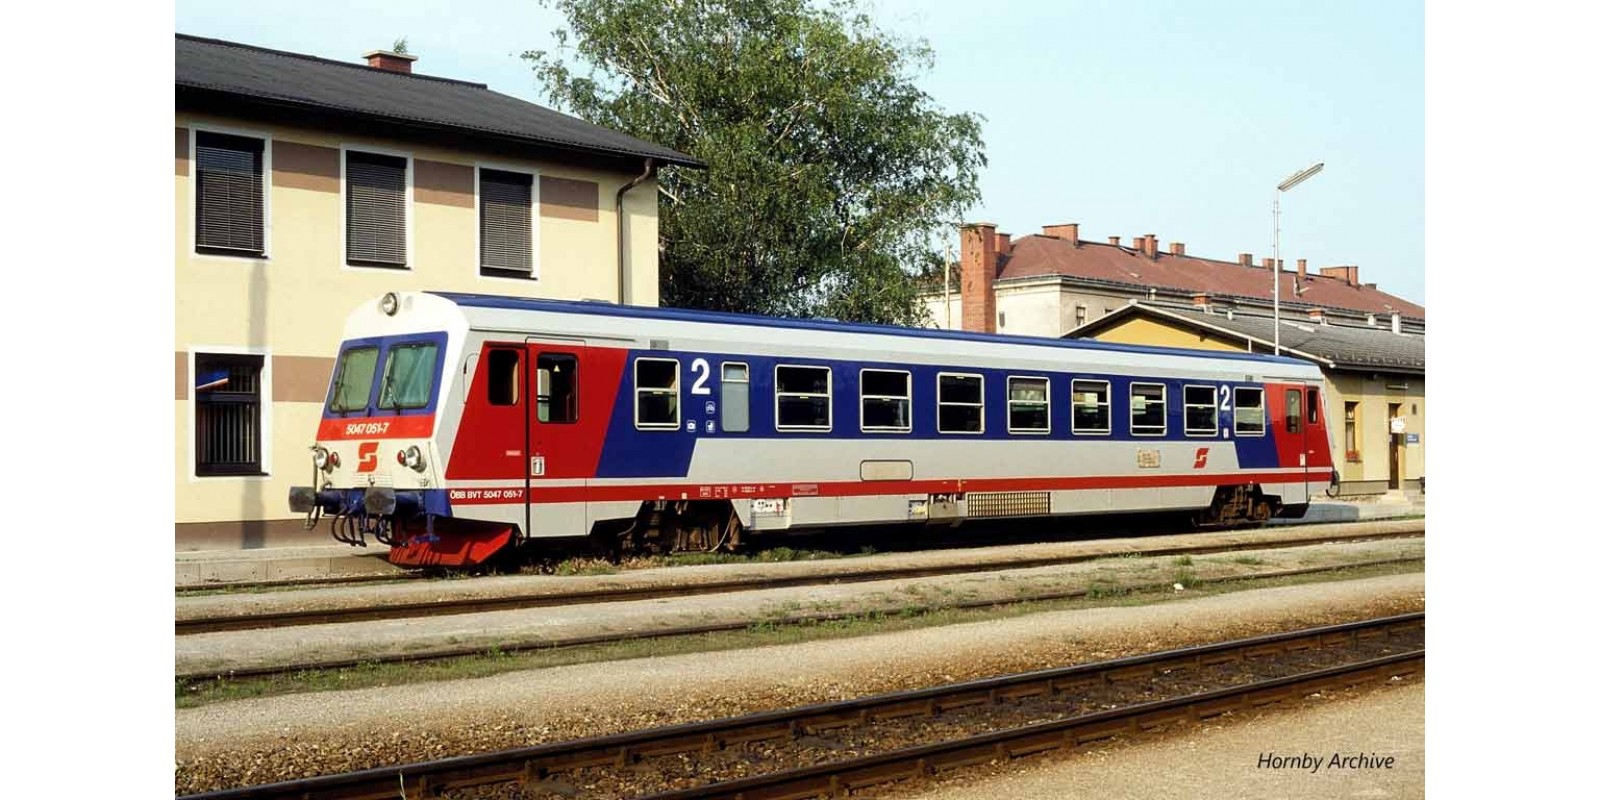 RI2757S diesel railcar class 5047 grey-red-blue livery with old ÖBB logo, period IV-V, with DCC sound decoder